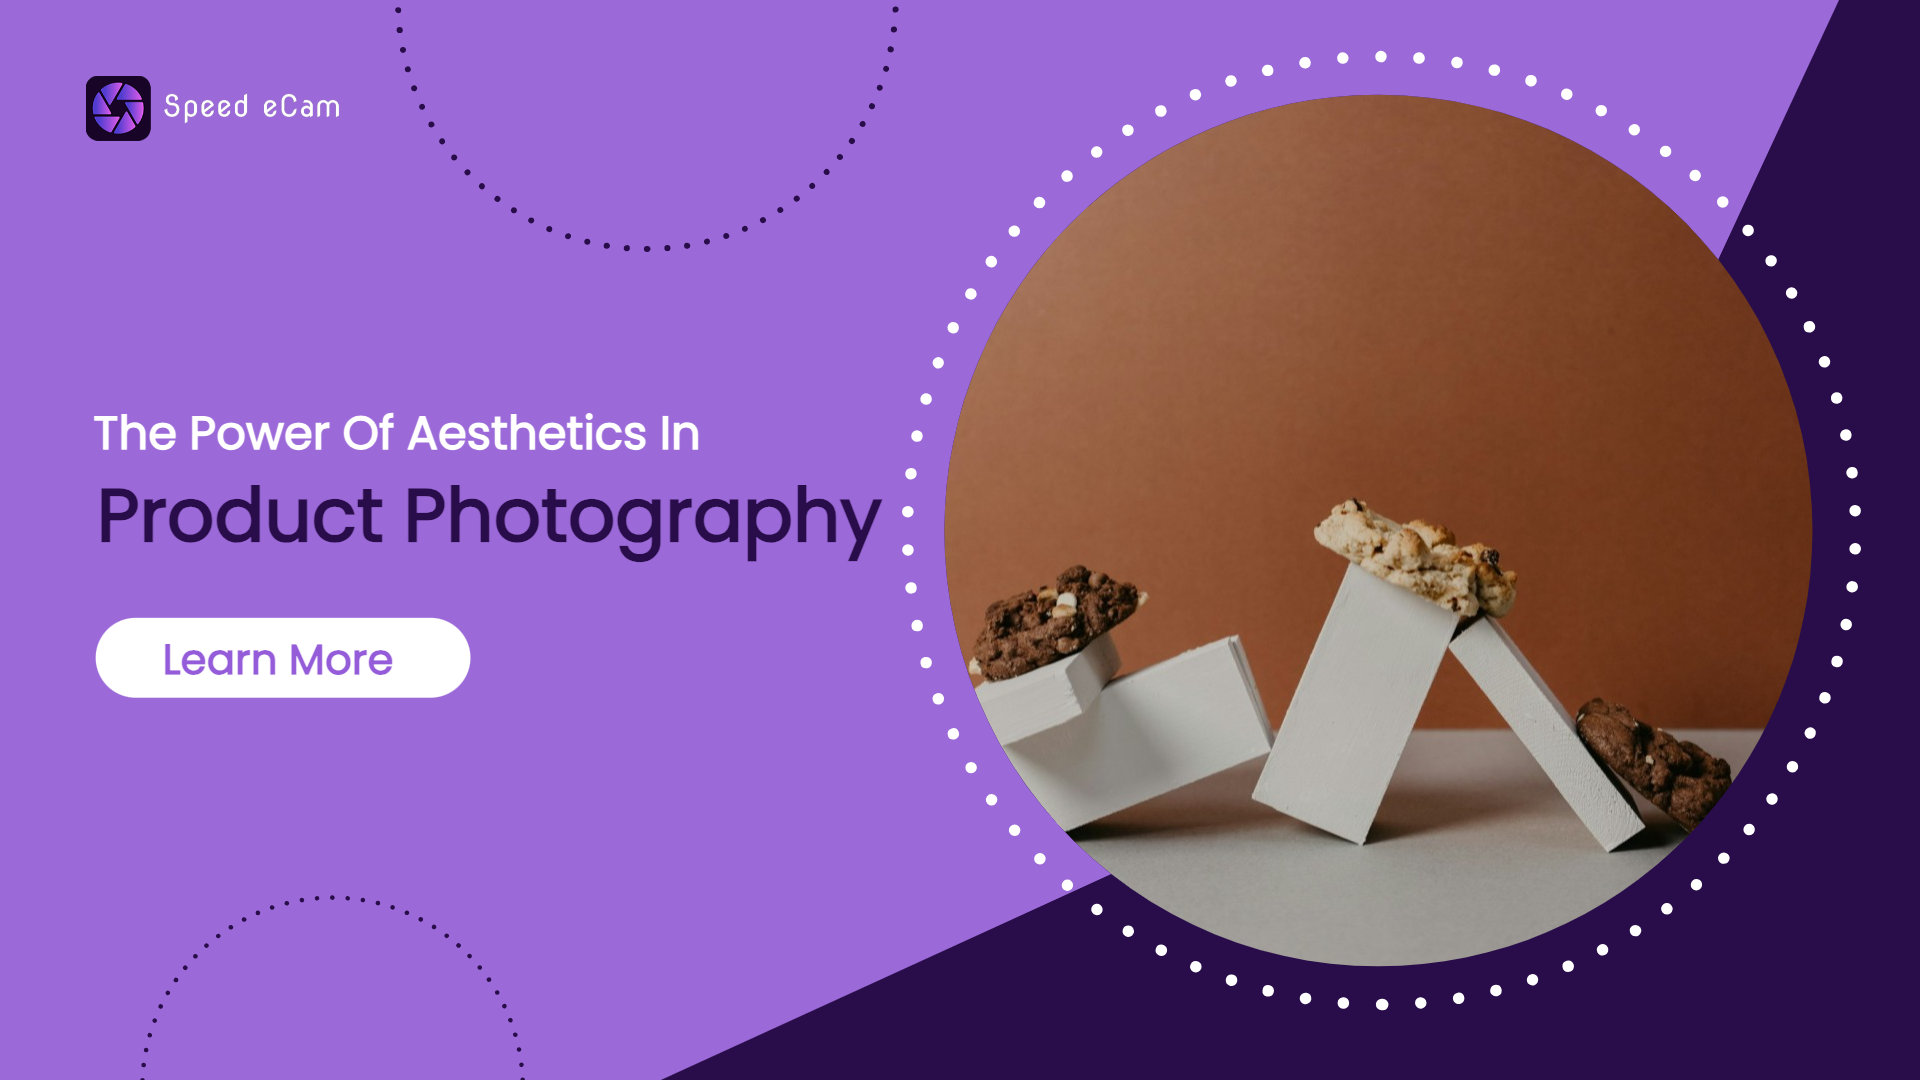 The Power of Aesthetics in Product Photography